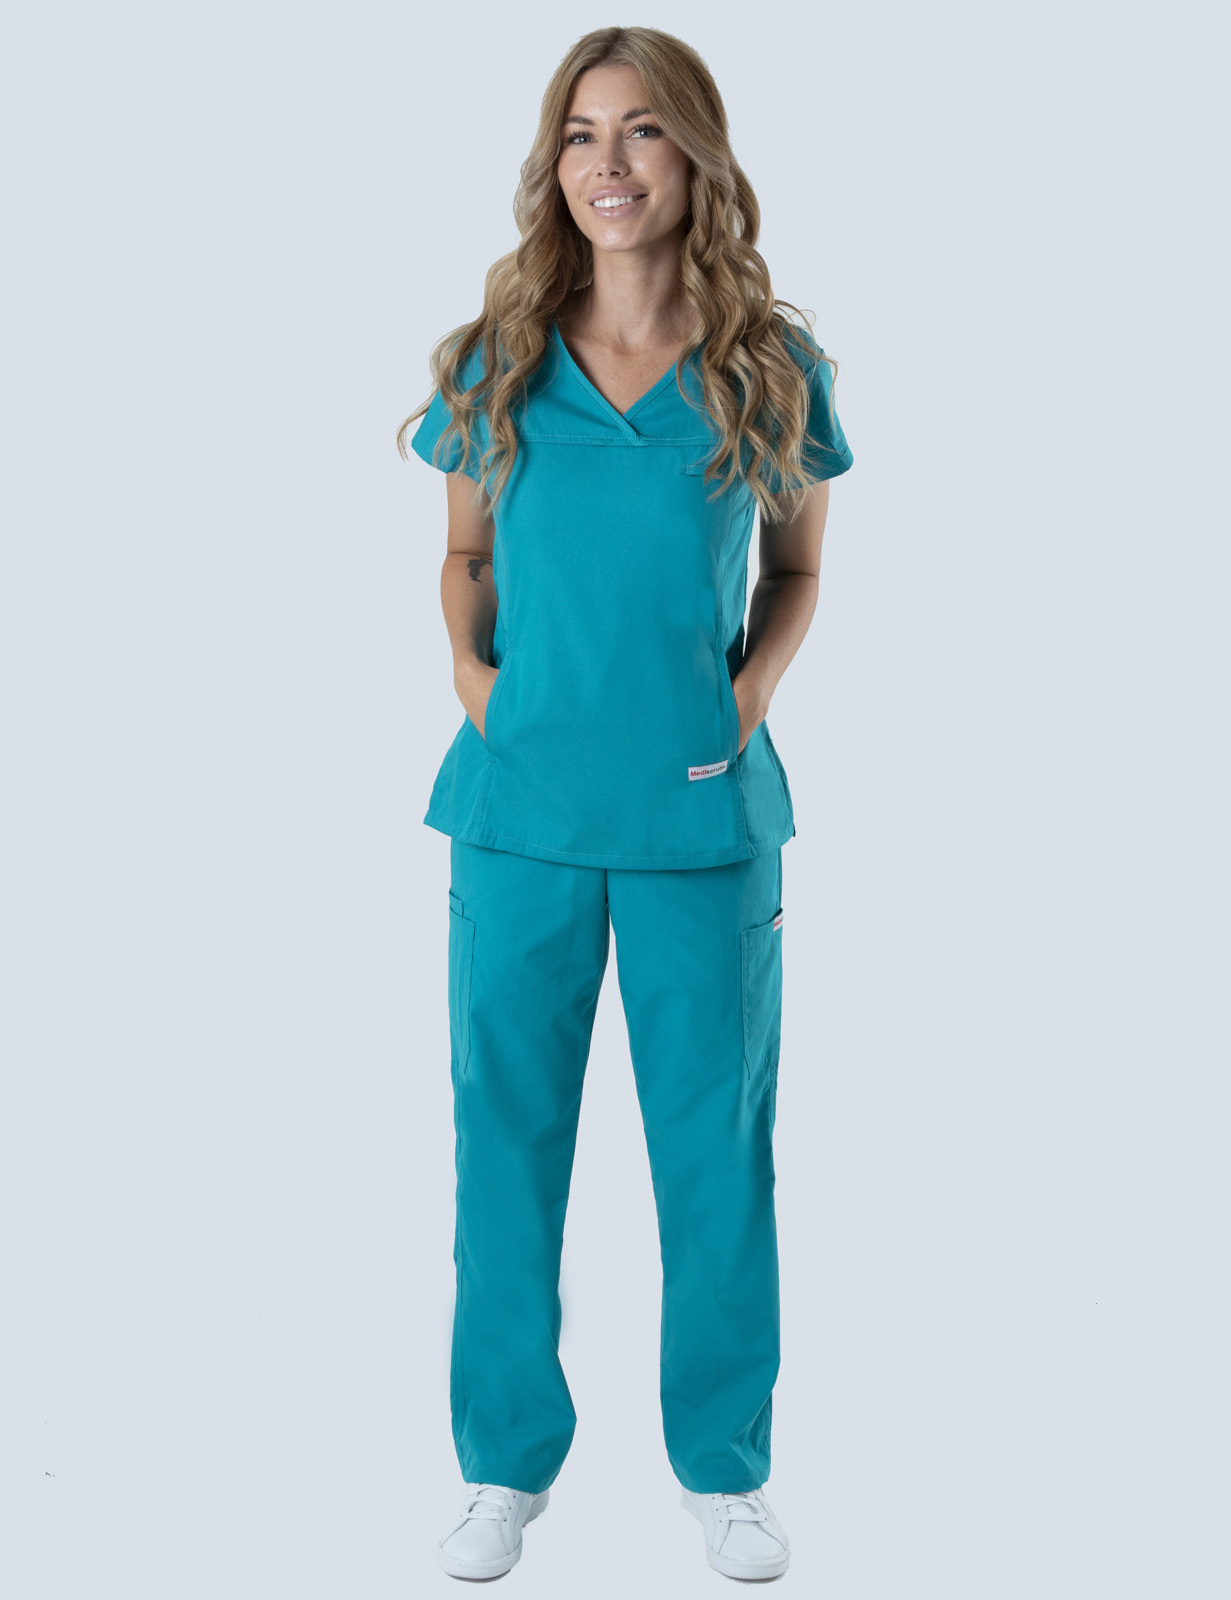 Maleny Hospital AIN (Women's Fit Solid Scrub Top and Cargo Pants in Teal incl Logos)